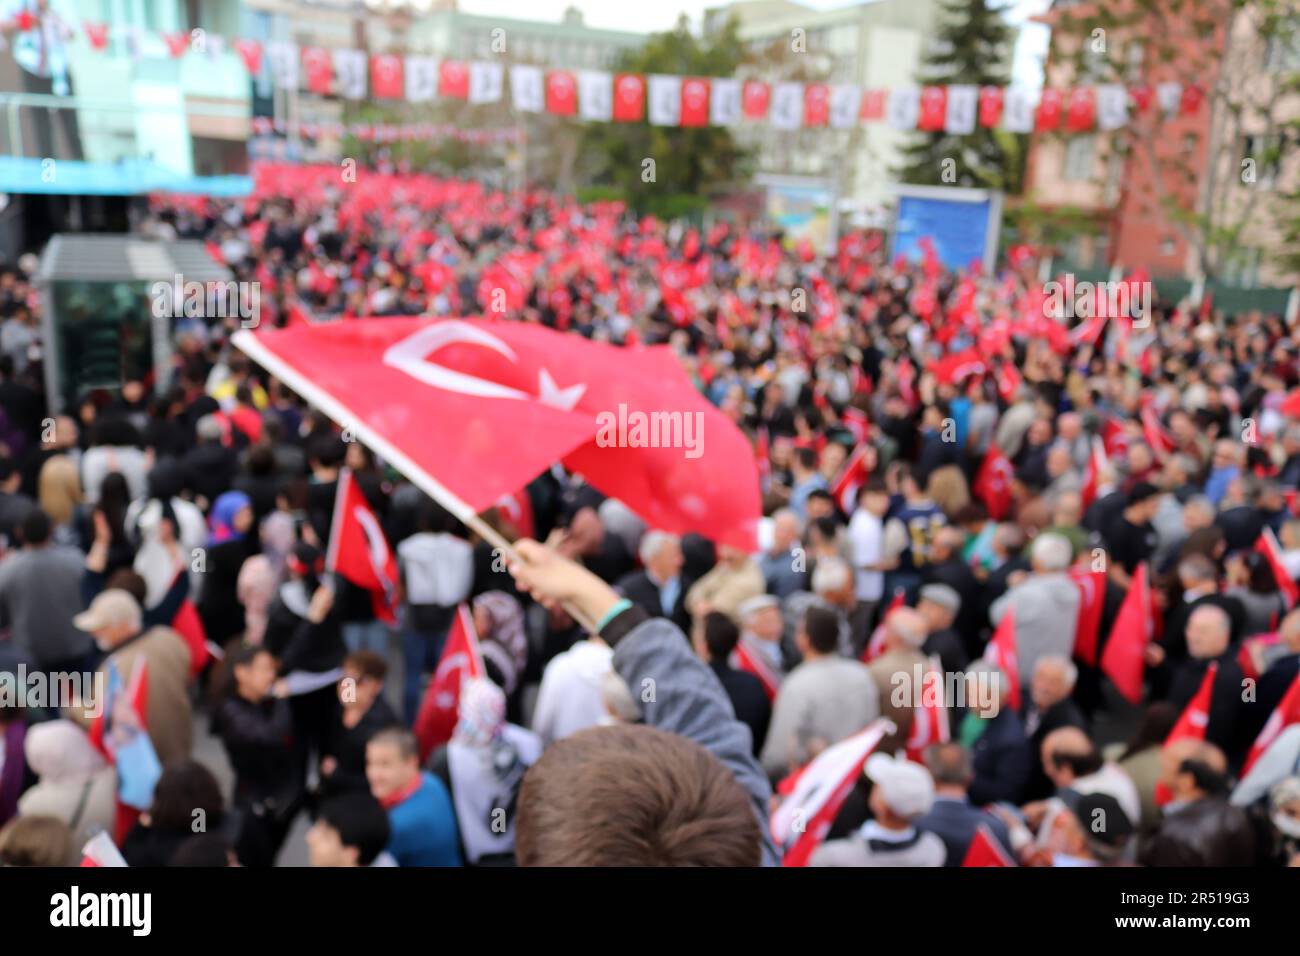 People waving Turkish flag at election rally in Turkey Stock Photo